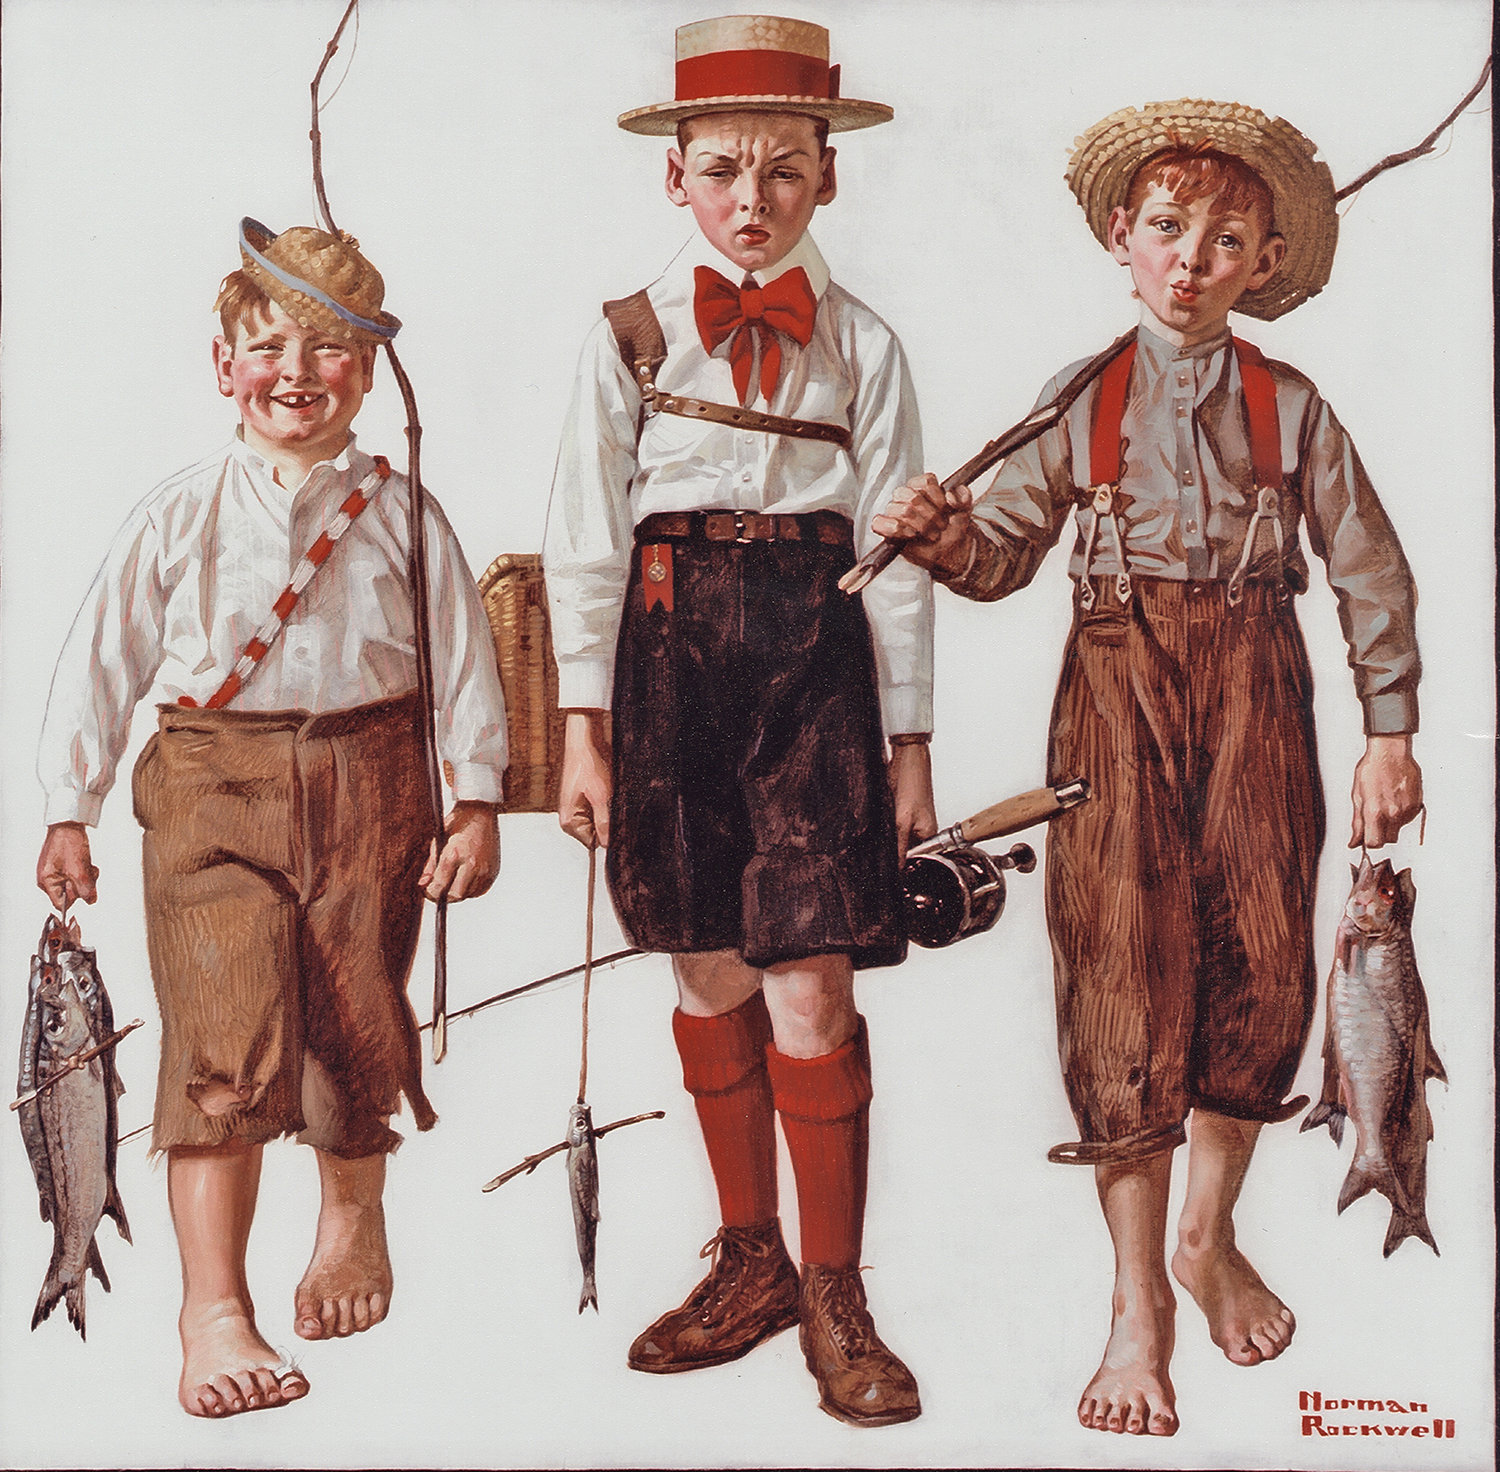 "The Catch," 1919, Norman Rockwell, (American, 1894–1978), oil on canvas, 29 x 29 in., Norman Rockwell Museum Collection.